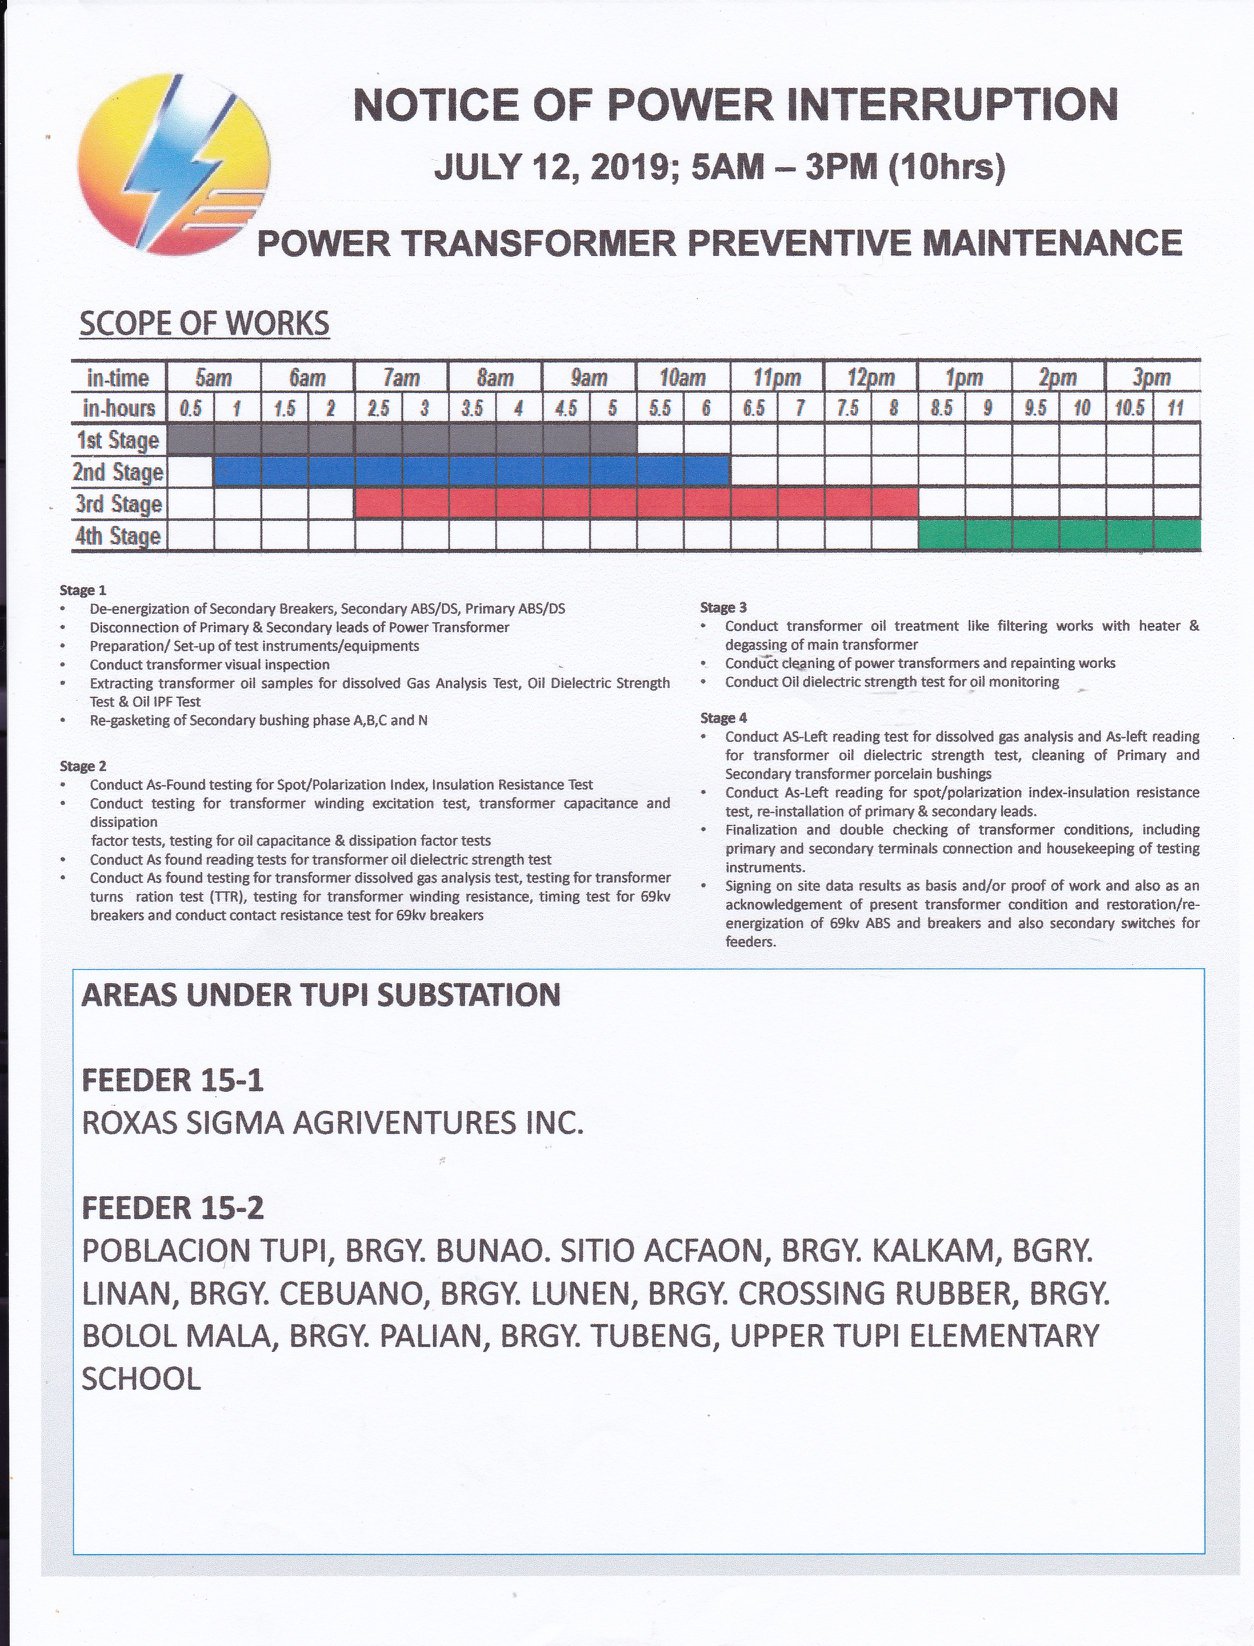 Notice of Power Interruption – JULY 12 to 20, 2019